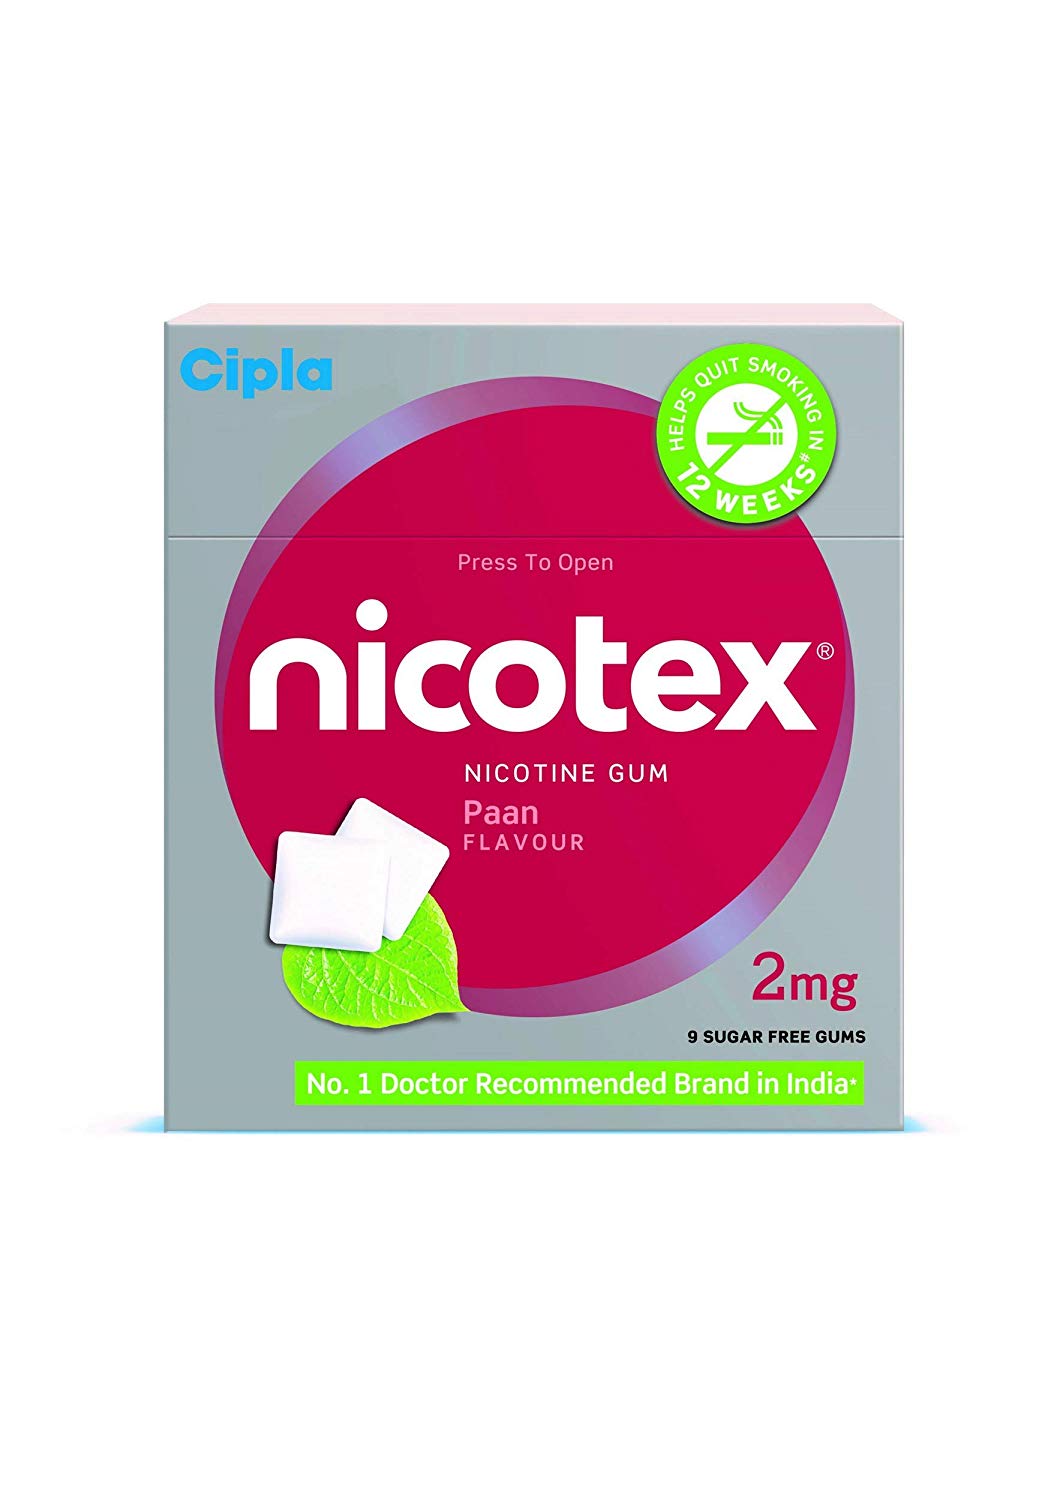 Nicotex 2mg Paan Flavour Nicotine Gum Pack of 10 boxes